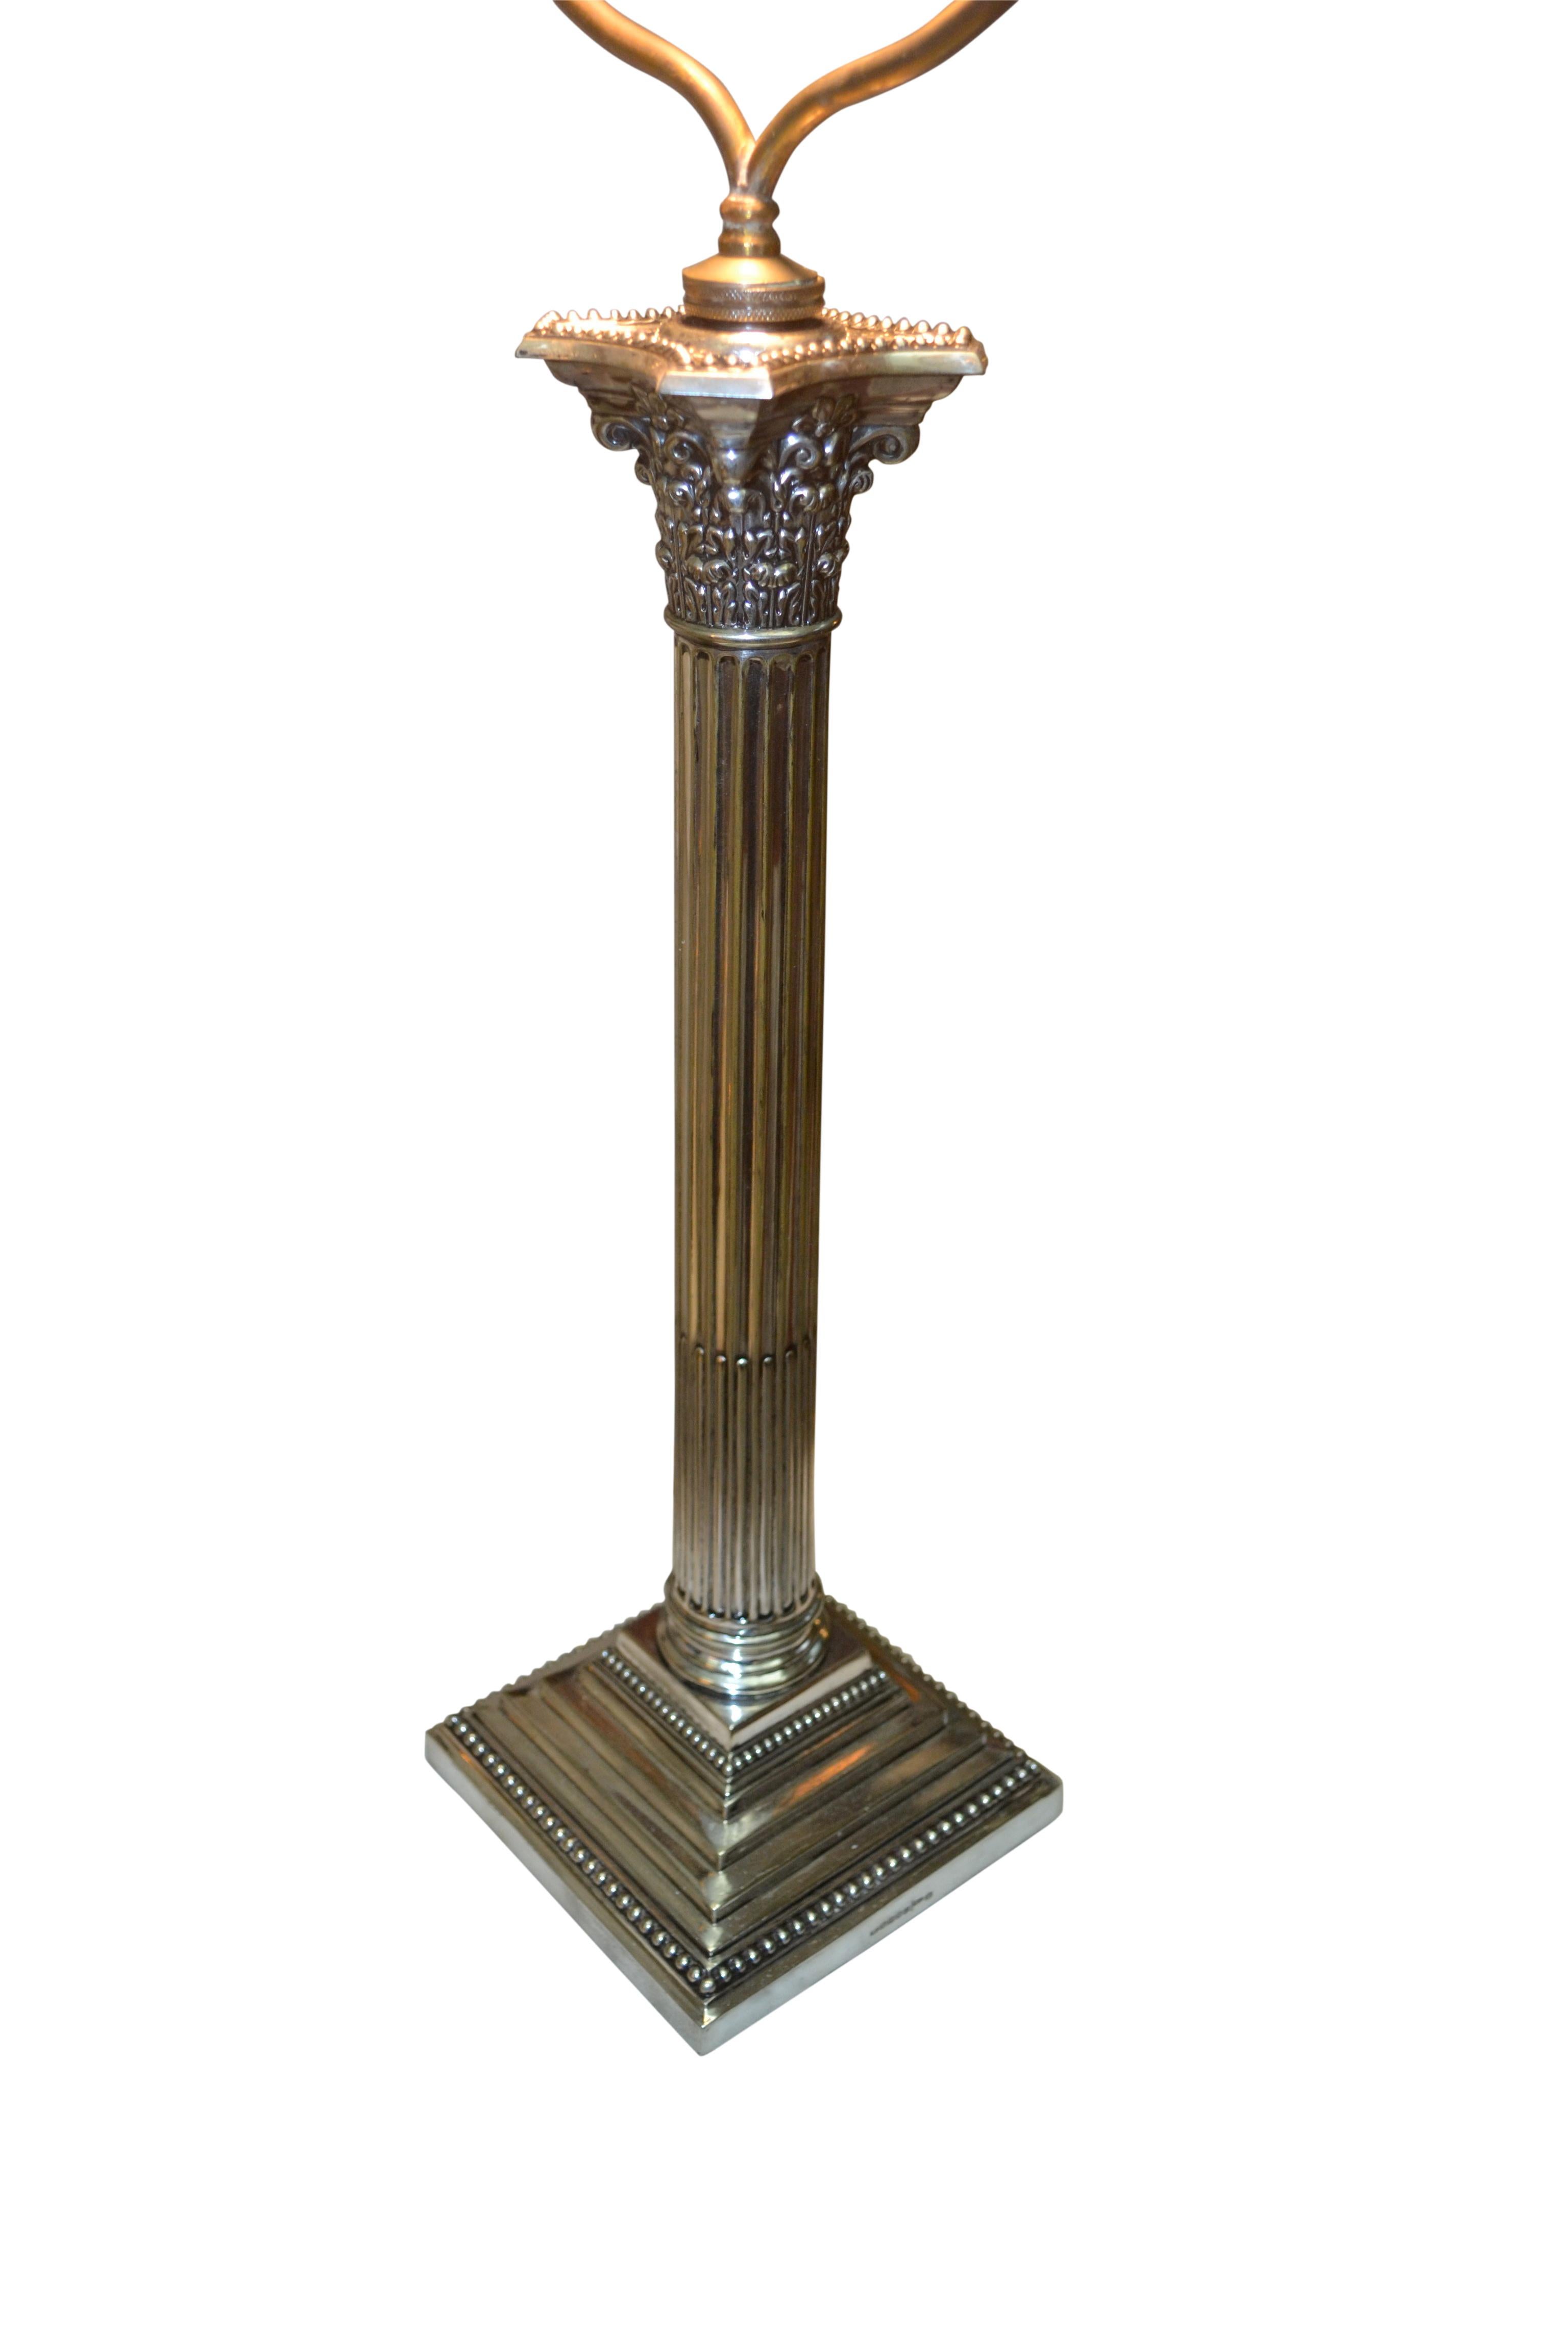 English Edwardian Silver Plated Corinthian Column Lamp Hallmarked by Walker and Hall